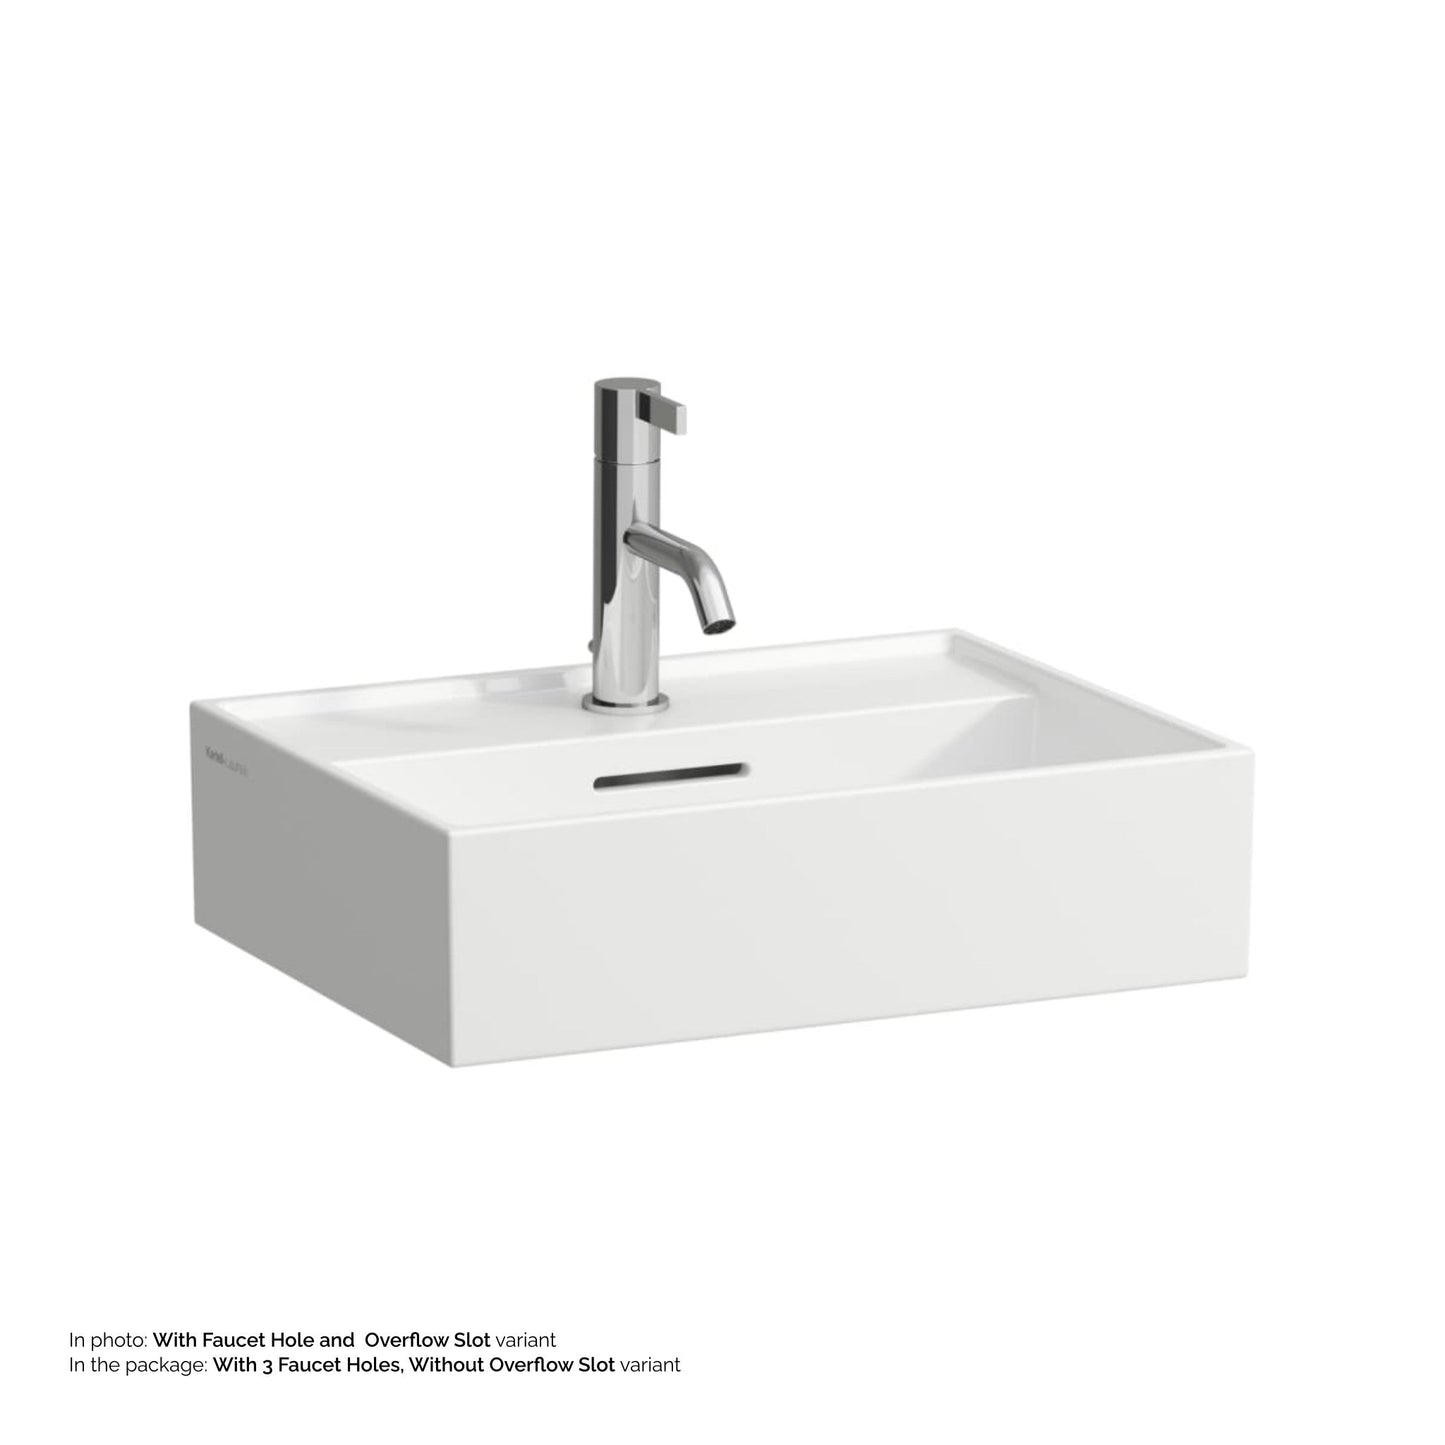 Laufen Kartell 18" x 13" White Wall-Mounted Bathroom Sink With 3 Faucet Holes